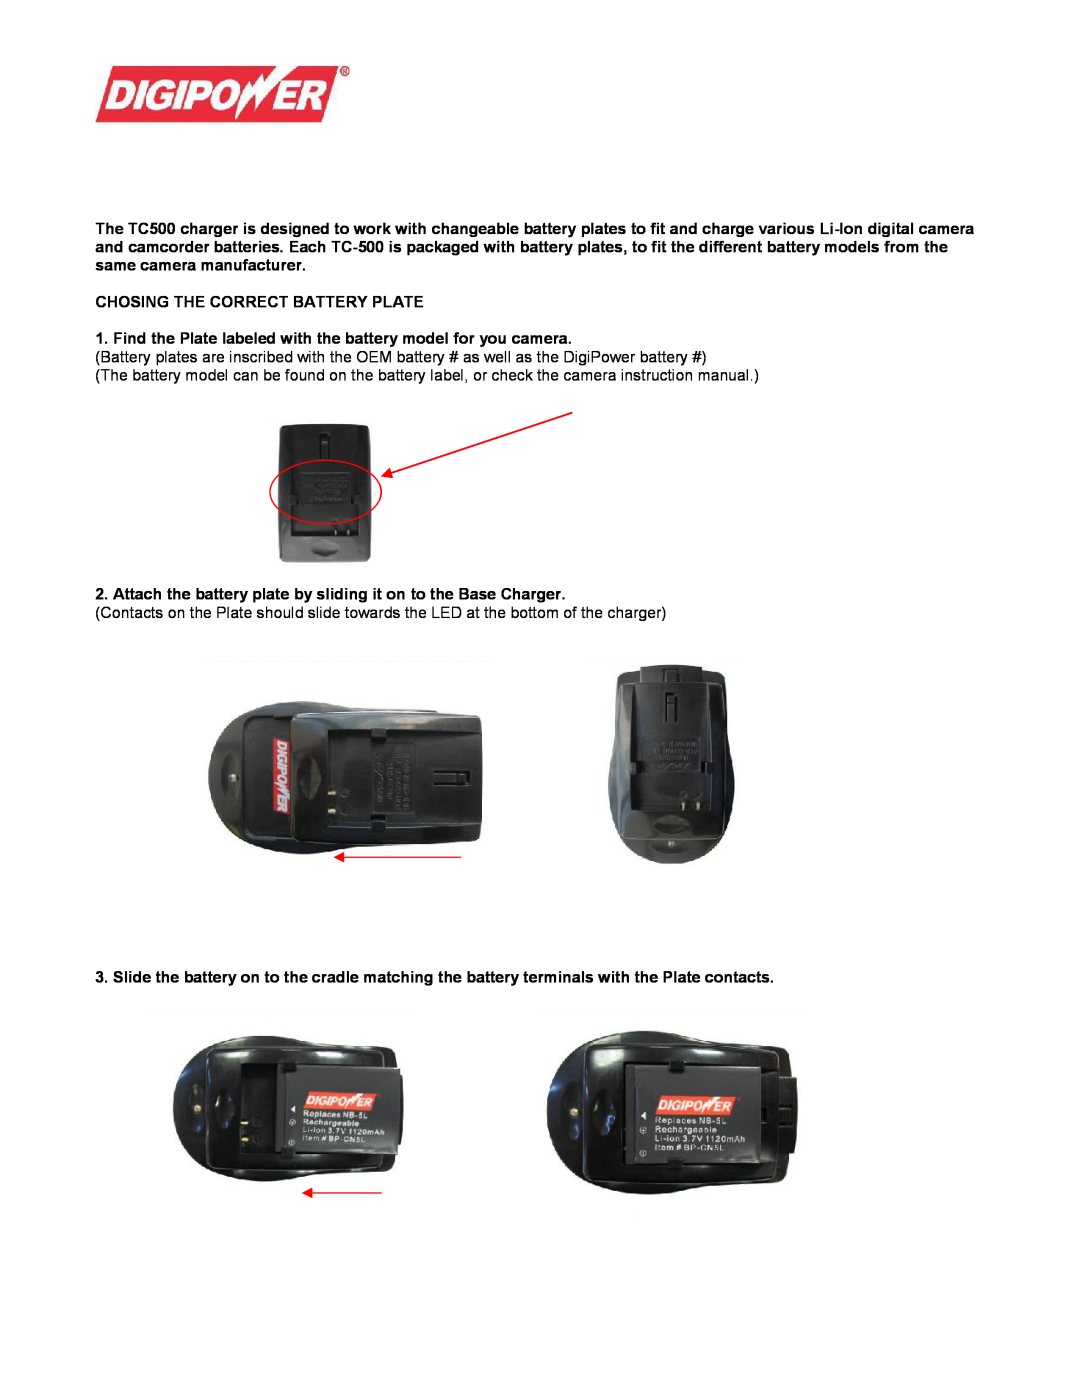 DigiPower TC-500 operating instructions Chosing The Correct Battery Plate 